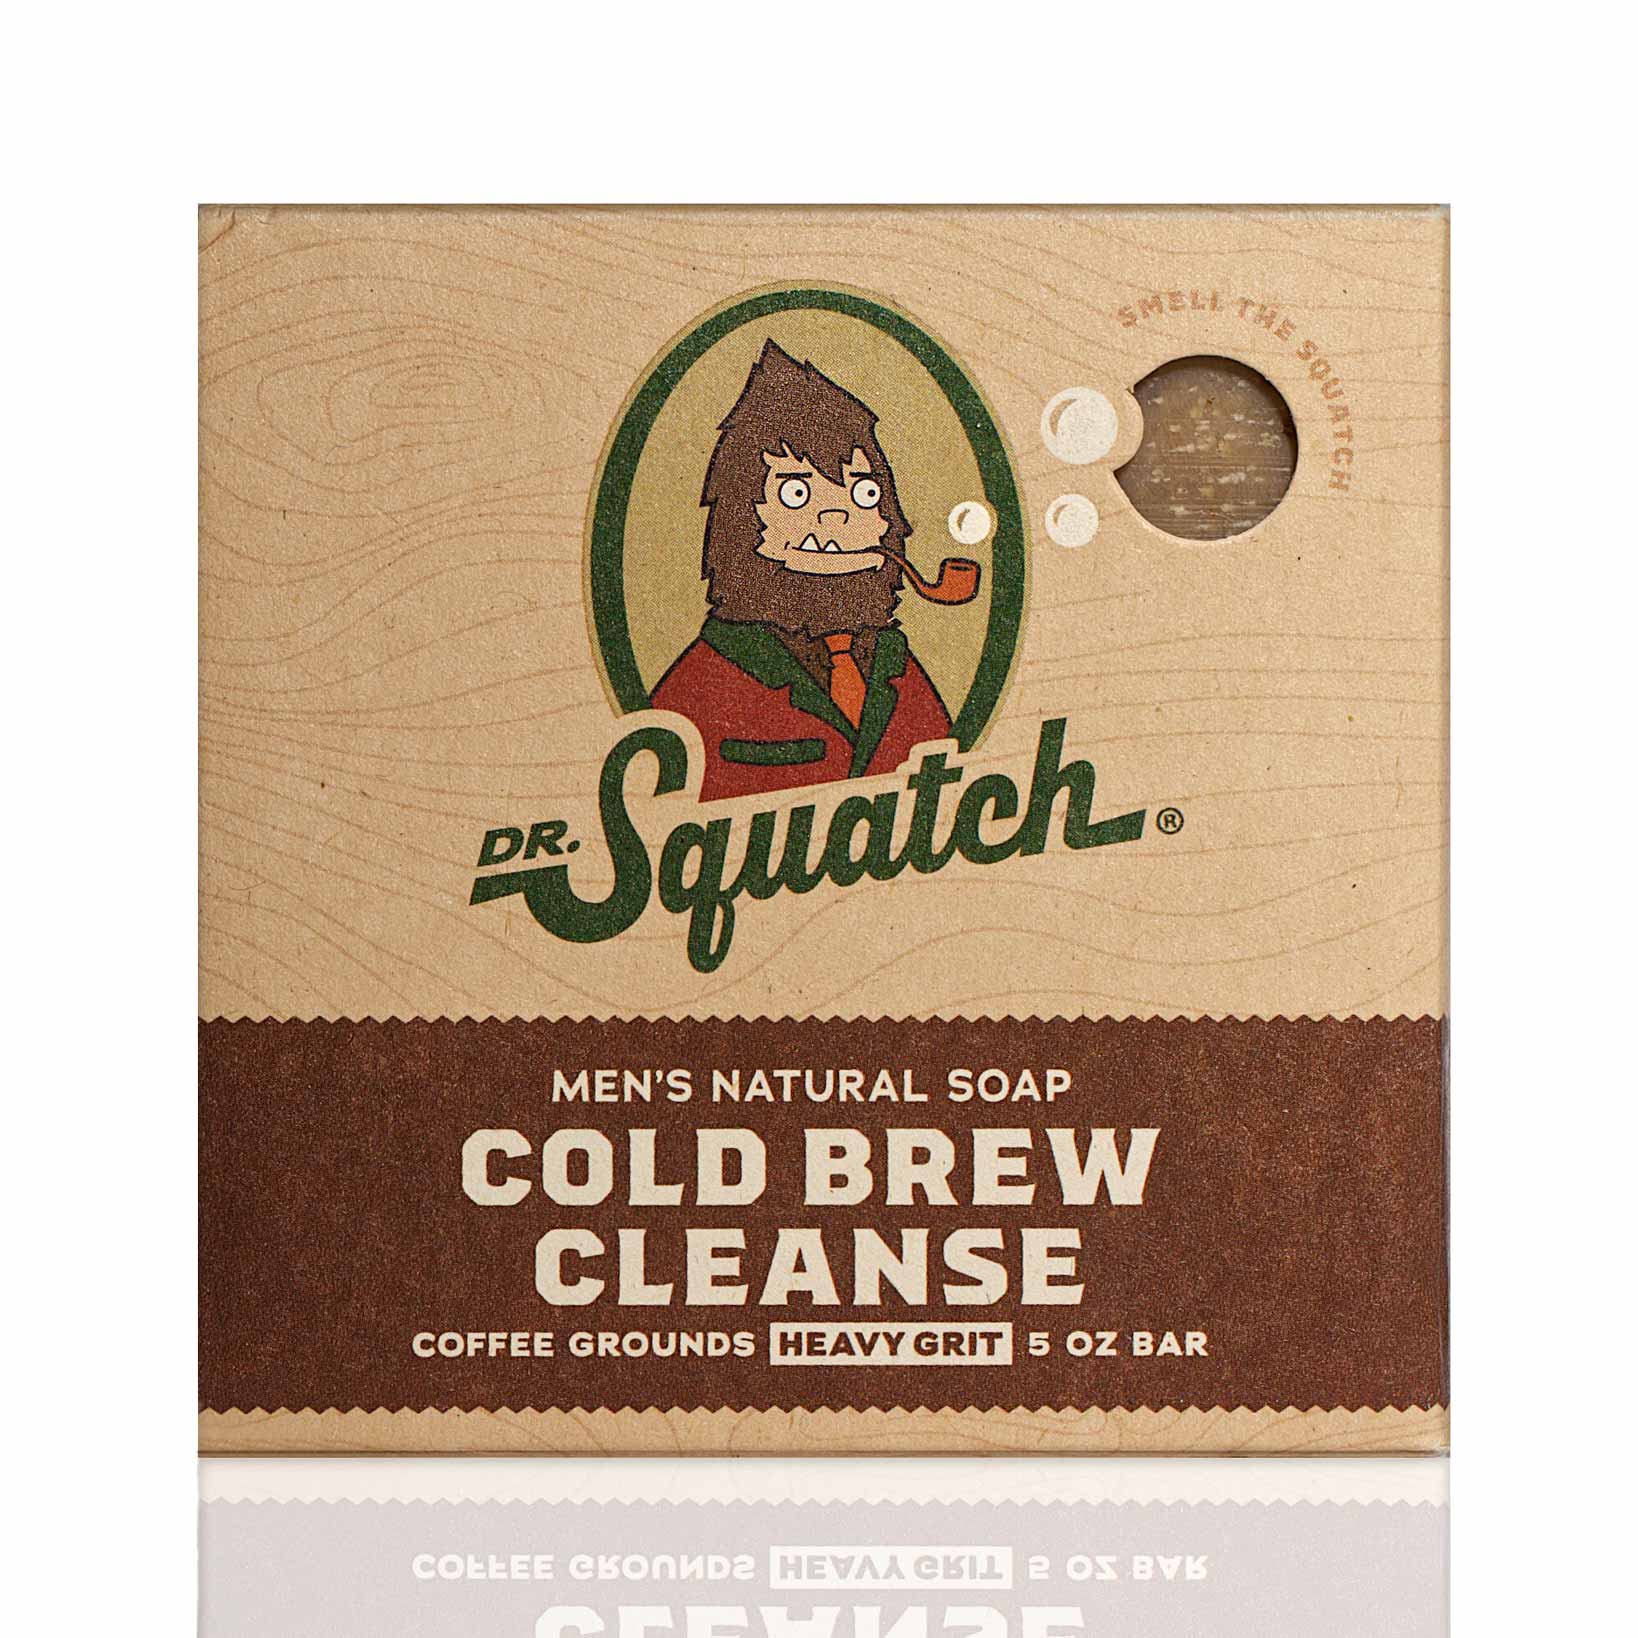 Dr Squatch Snowy Pine Tar Review